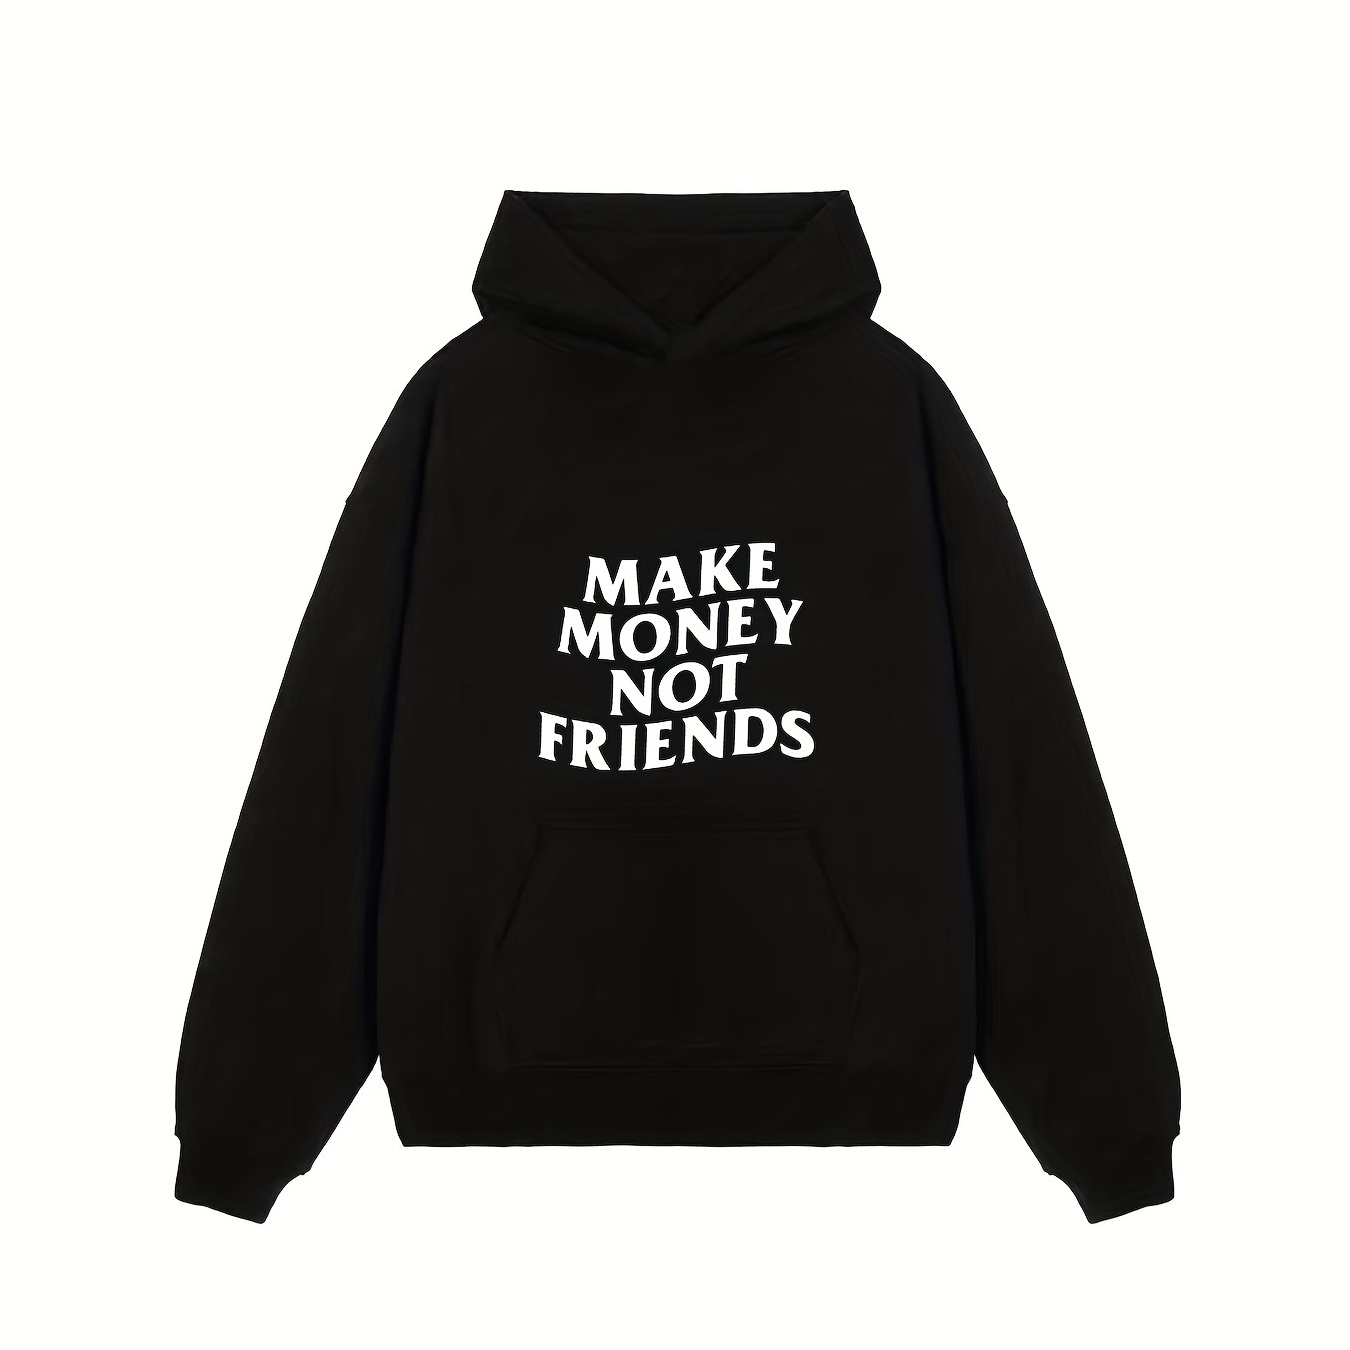 

Funny 'make Money Not Friends' Print Hoodie, Hoodies For Men, Men’s Casual Pullover Hooded Sweatshirt With Kangaroo Pocket For Spring Fall, As Gifts